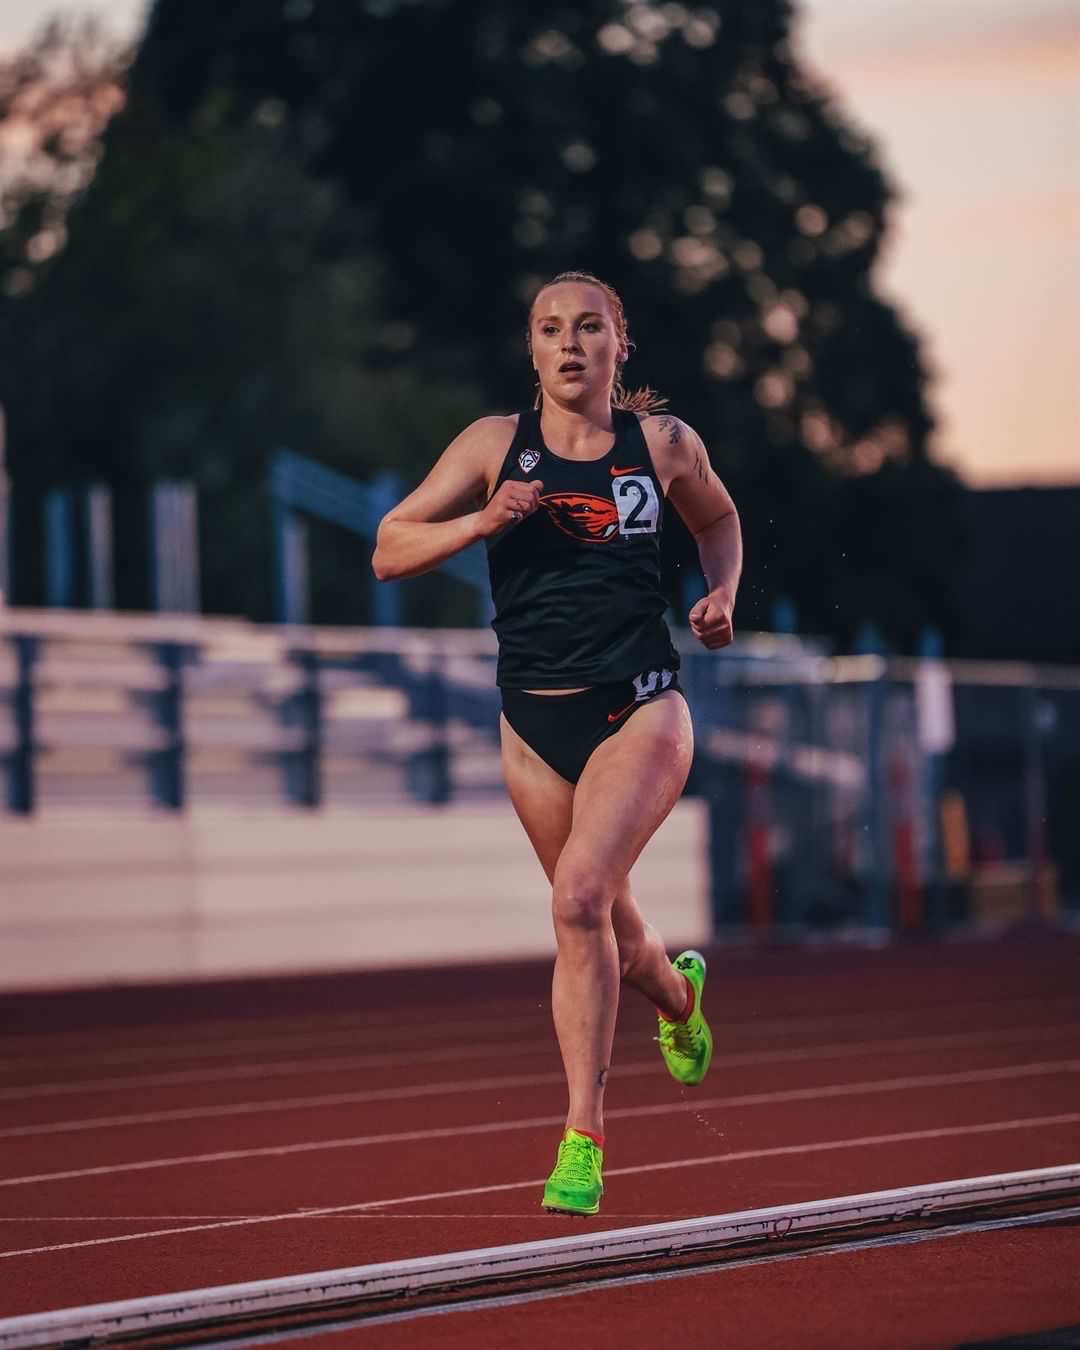 PAC-12 champ Fetherstonhaugh looks to carry momentum into upcoming seasons